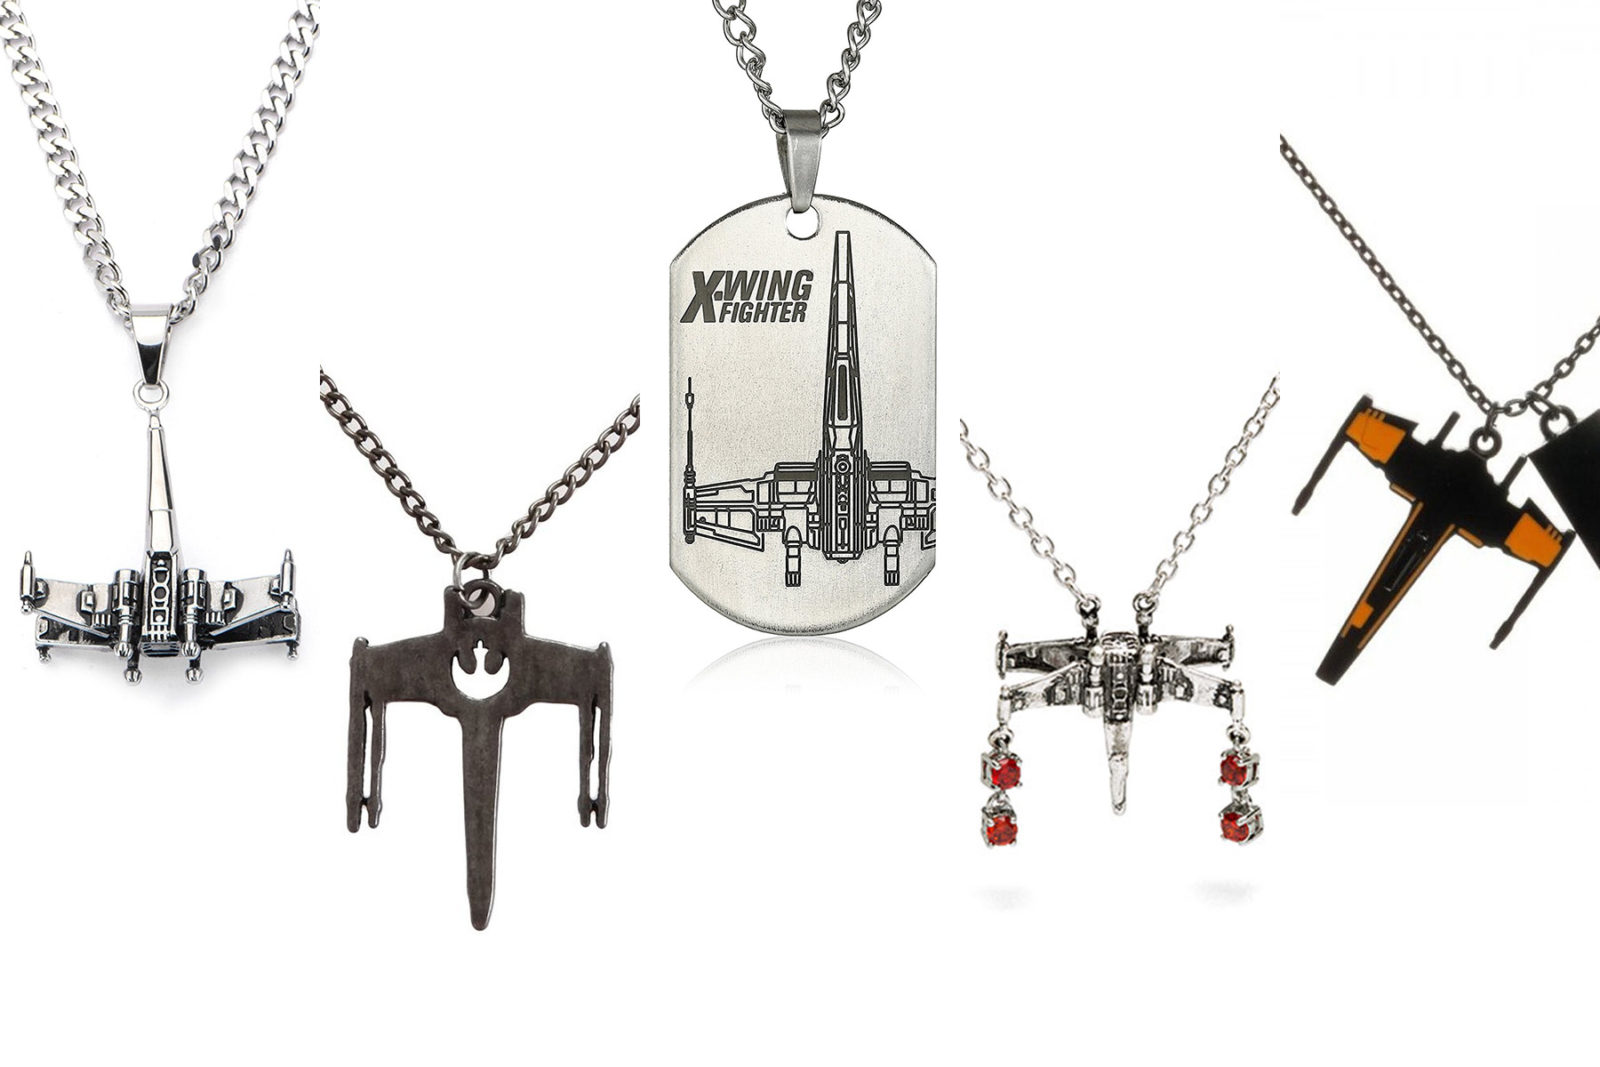 Leia’s List – X-Wing Fighter Necklaces